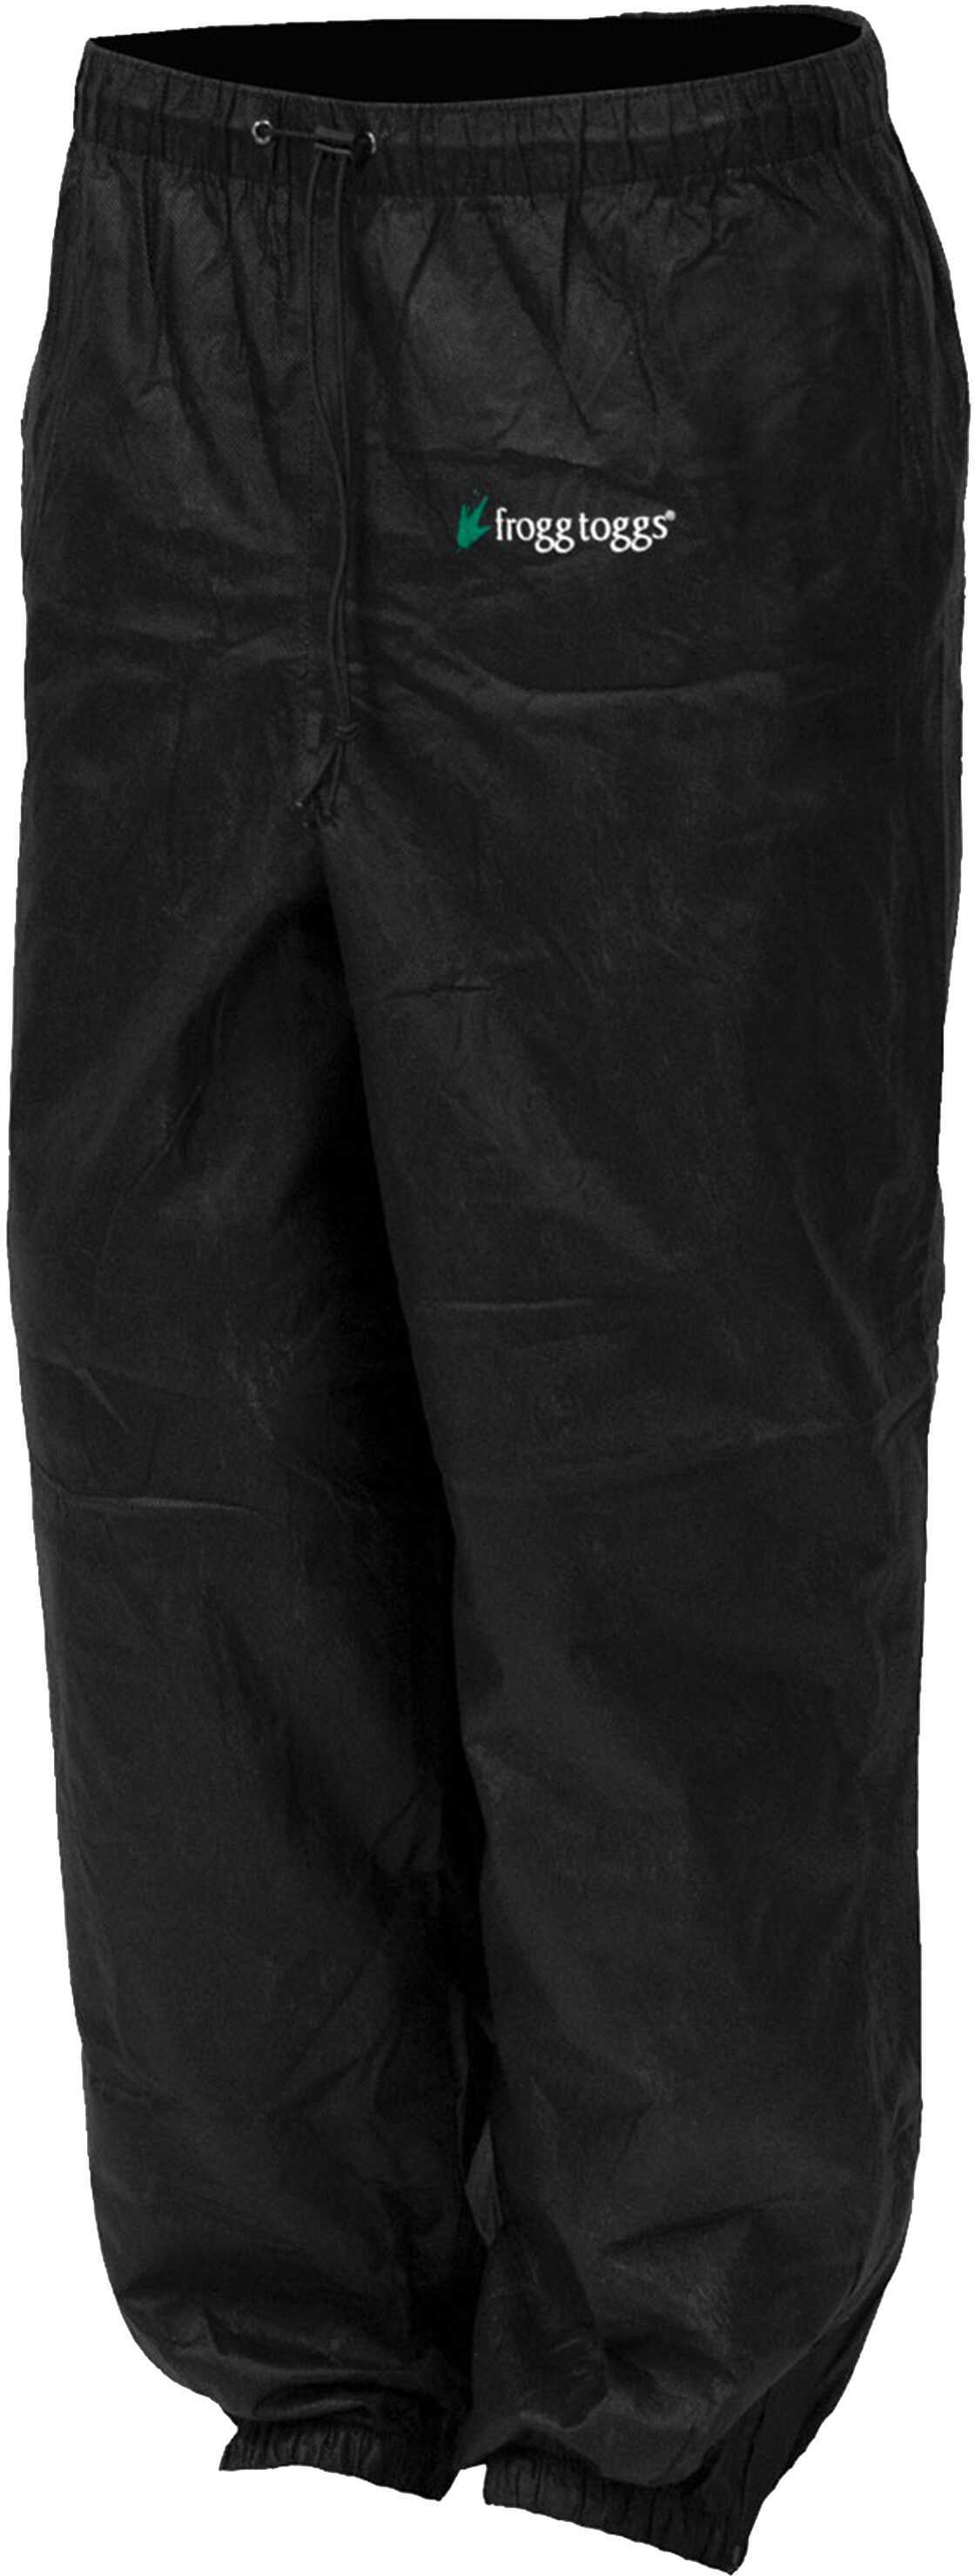 Frogg Toggs Pro Action Pant Ladies Black, Large